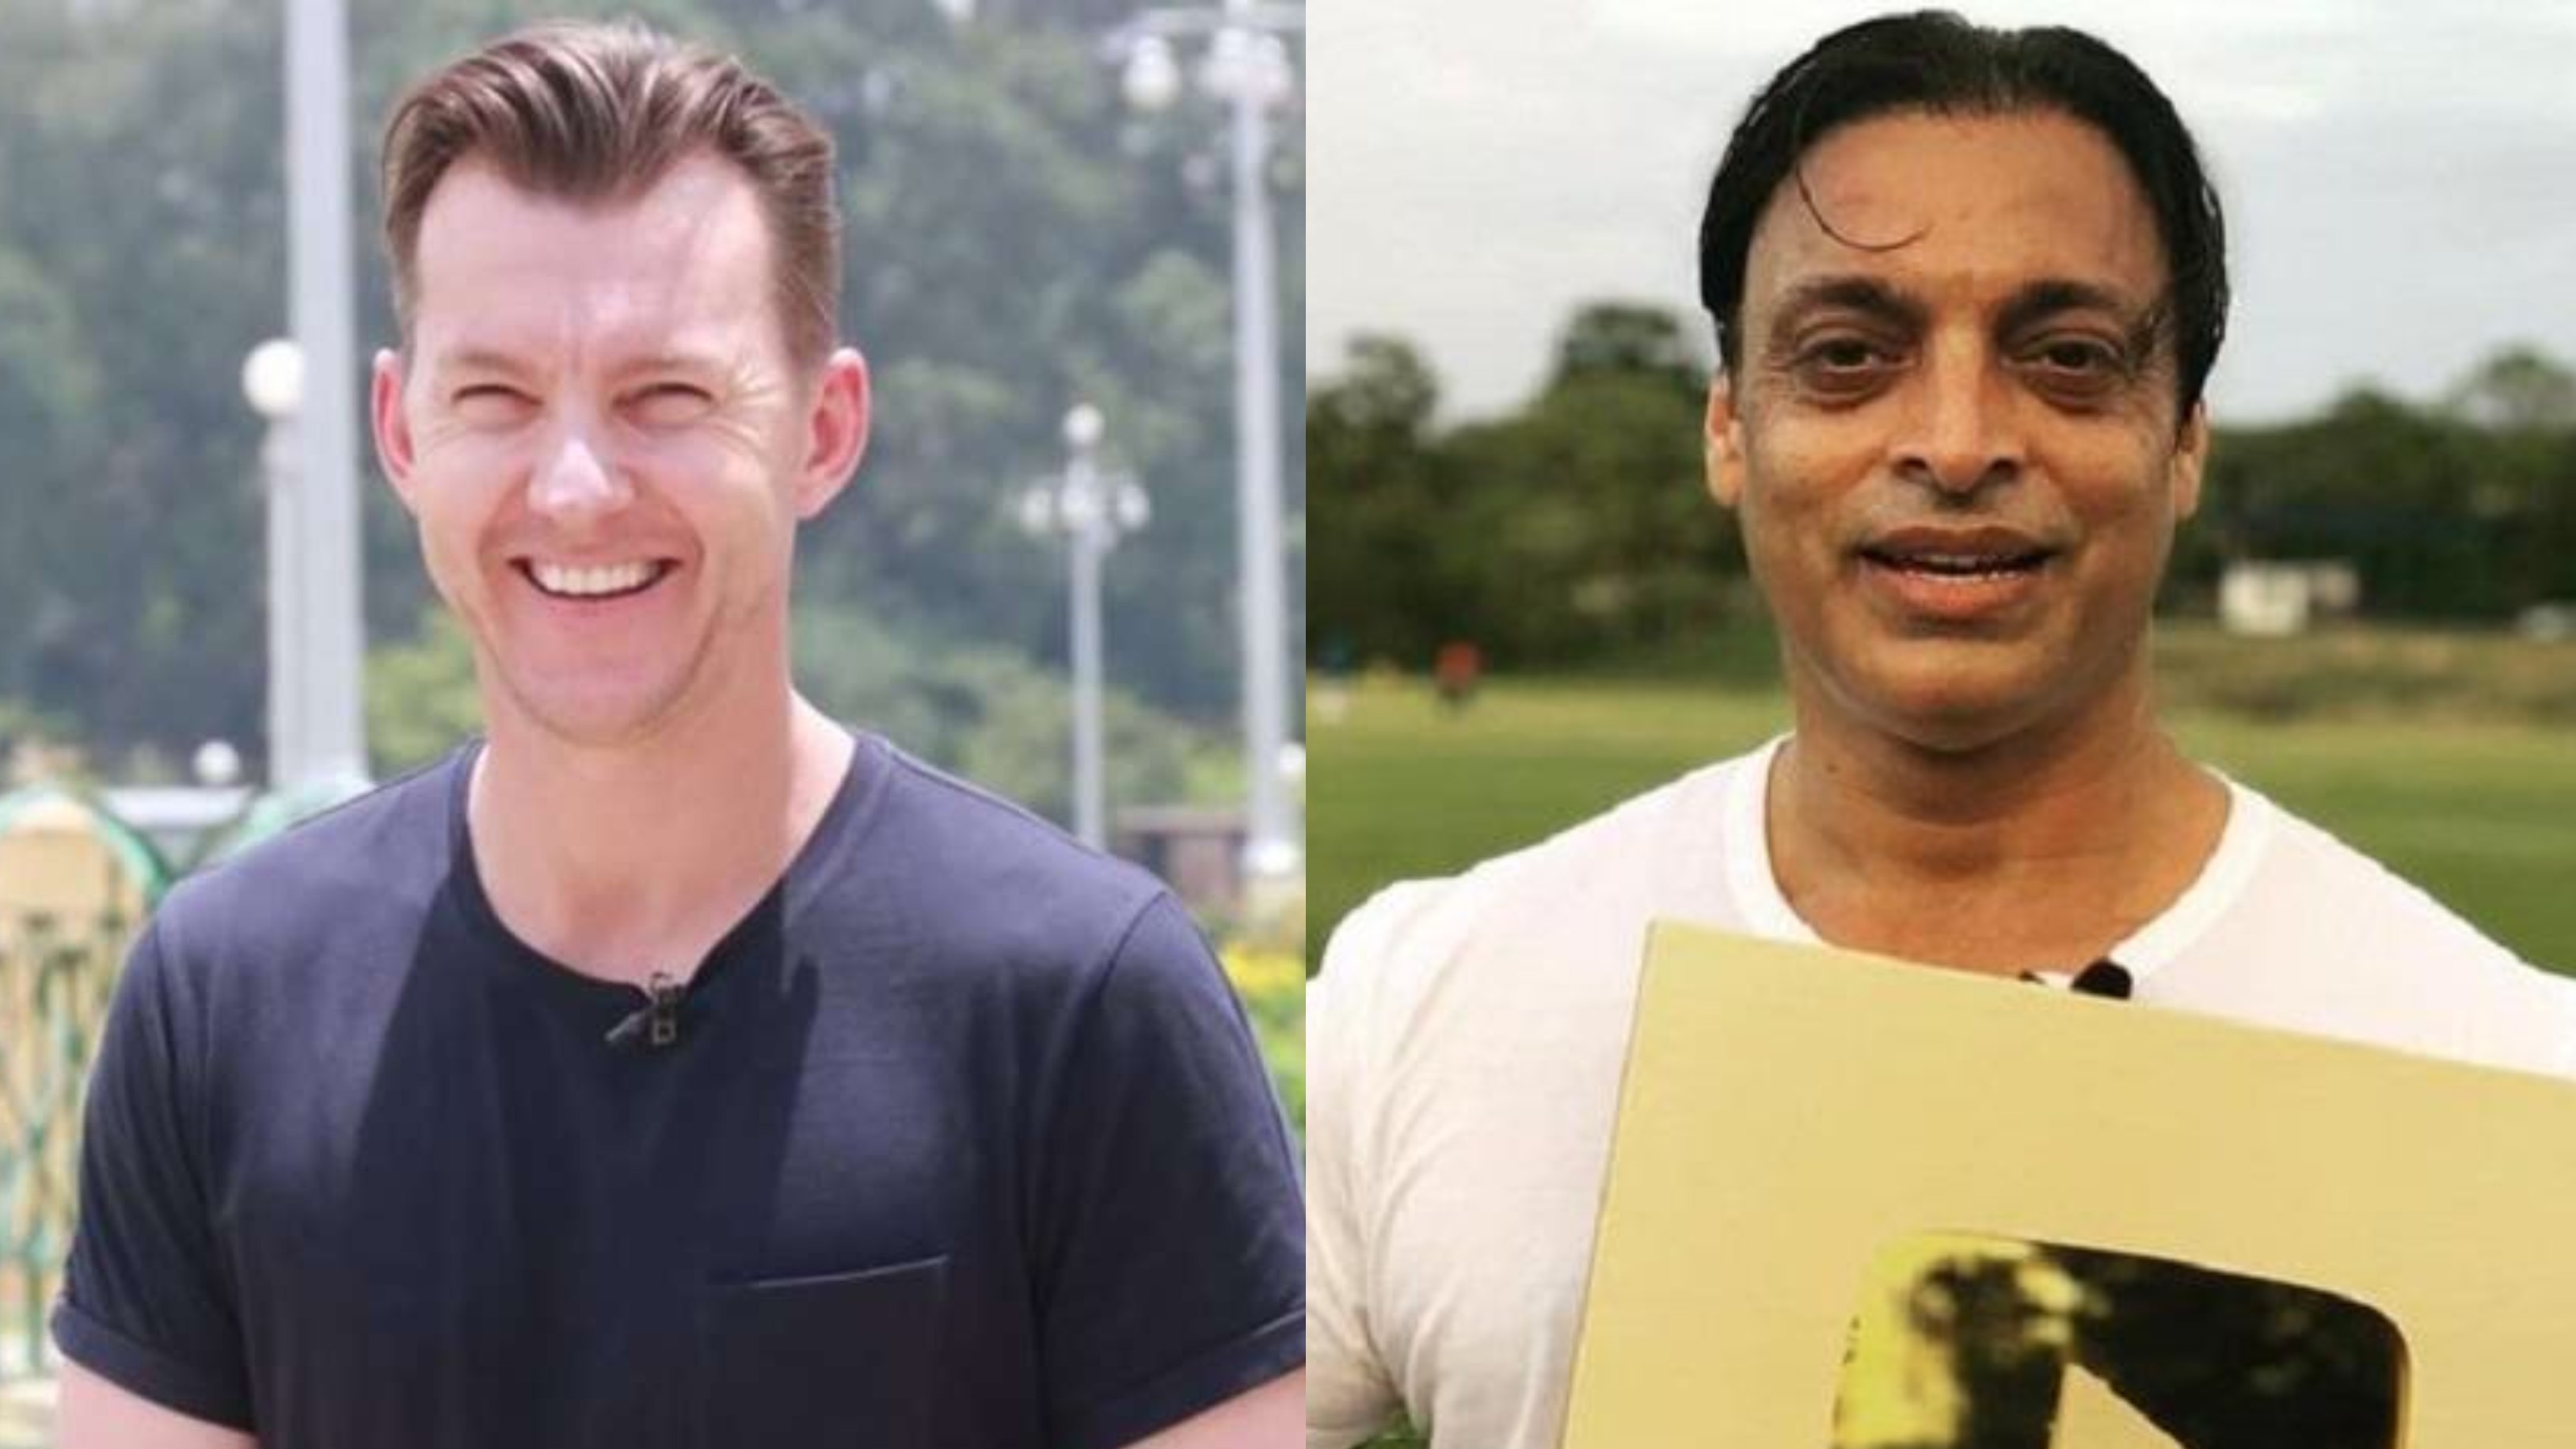 Shoaib Akhtar lauds Brett Lee for his honesty during his appearance on The Kapil Sharma Show